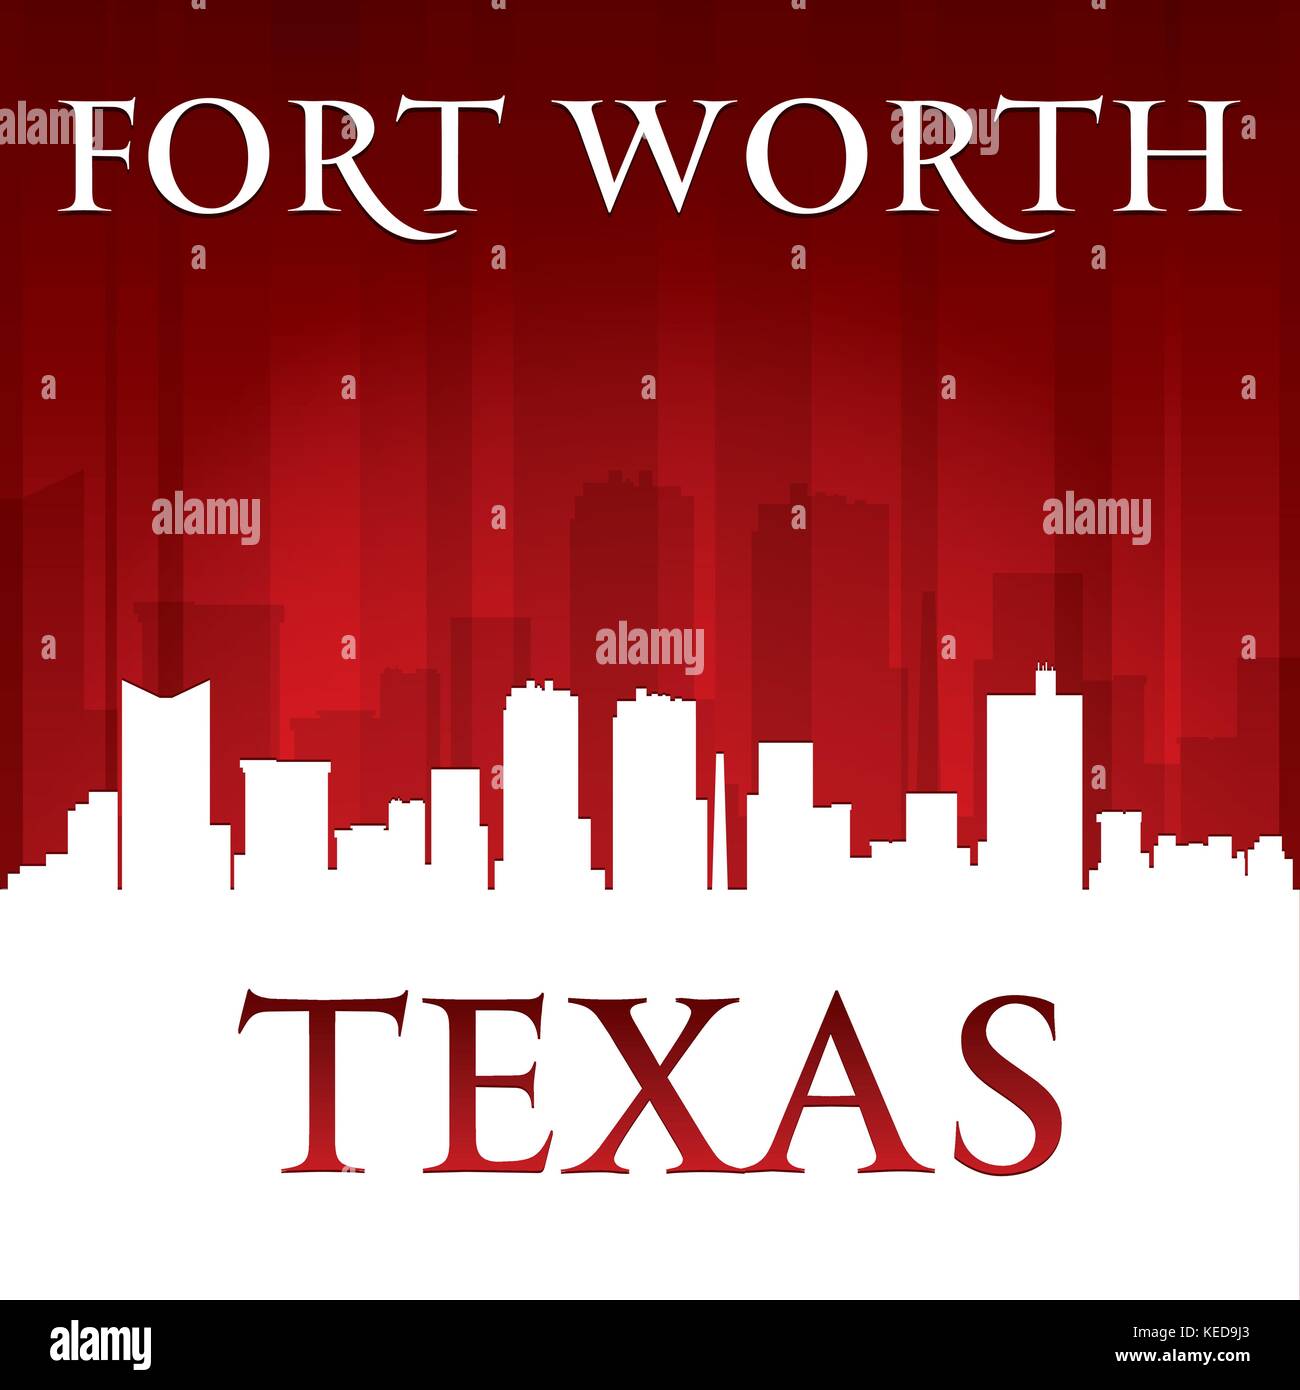 Fort Worth Texas City Skyline Silhouette Vector Illustration Stock Vector Image And Art Alamy 0588